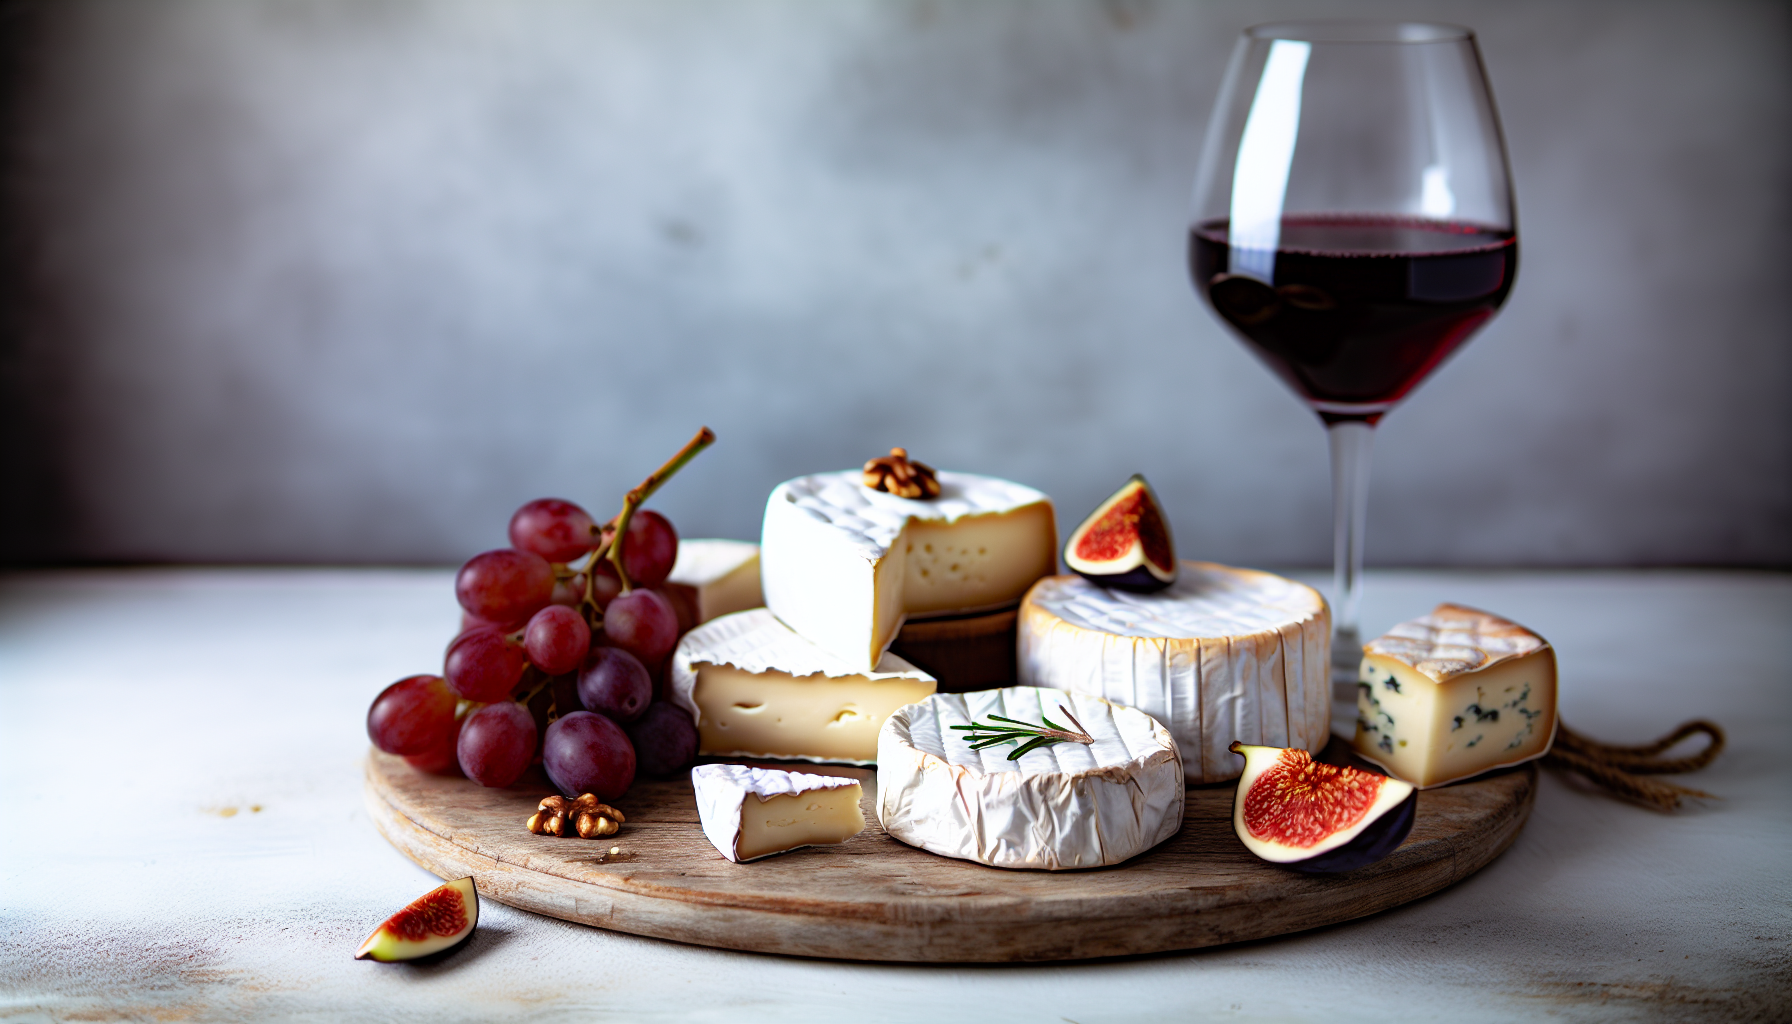 Assortment of soft cheeses with light-bodied red wines